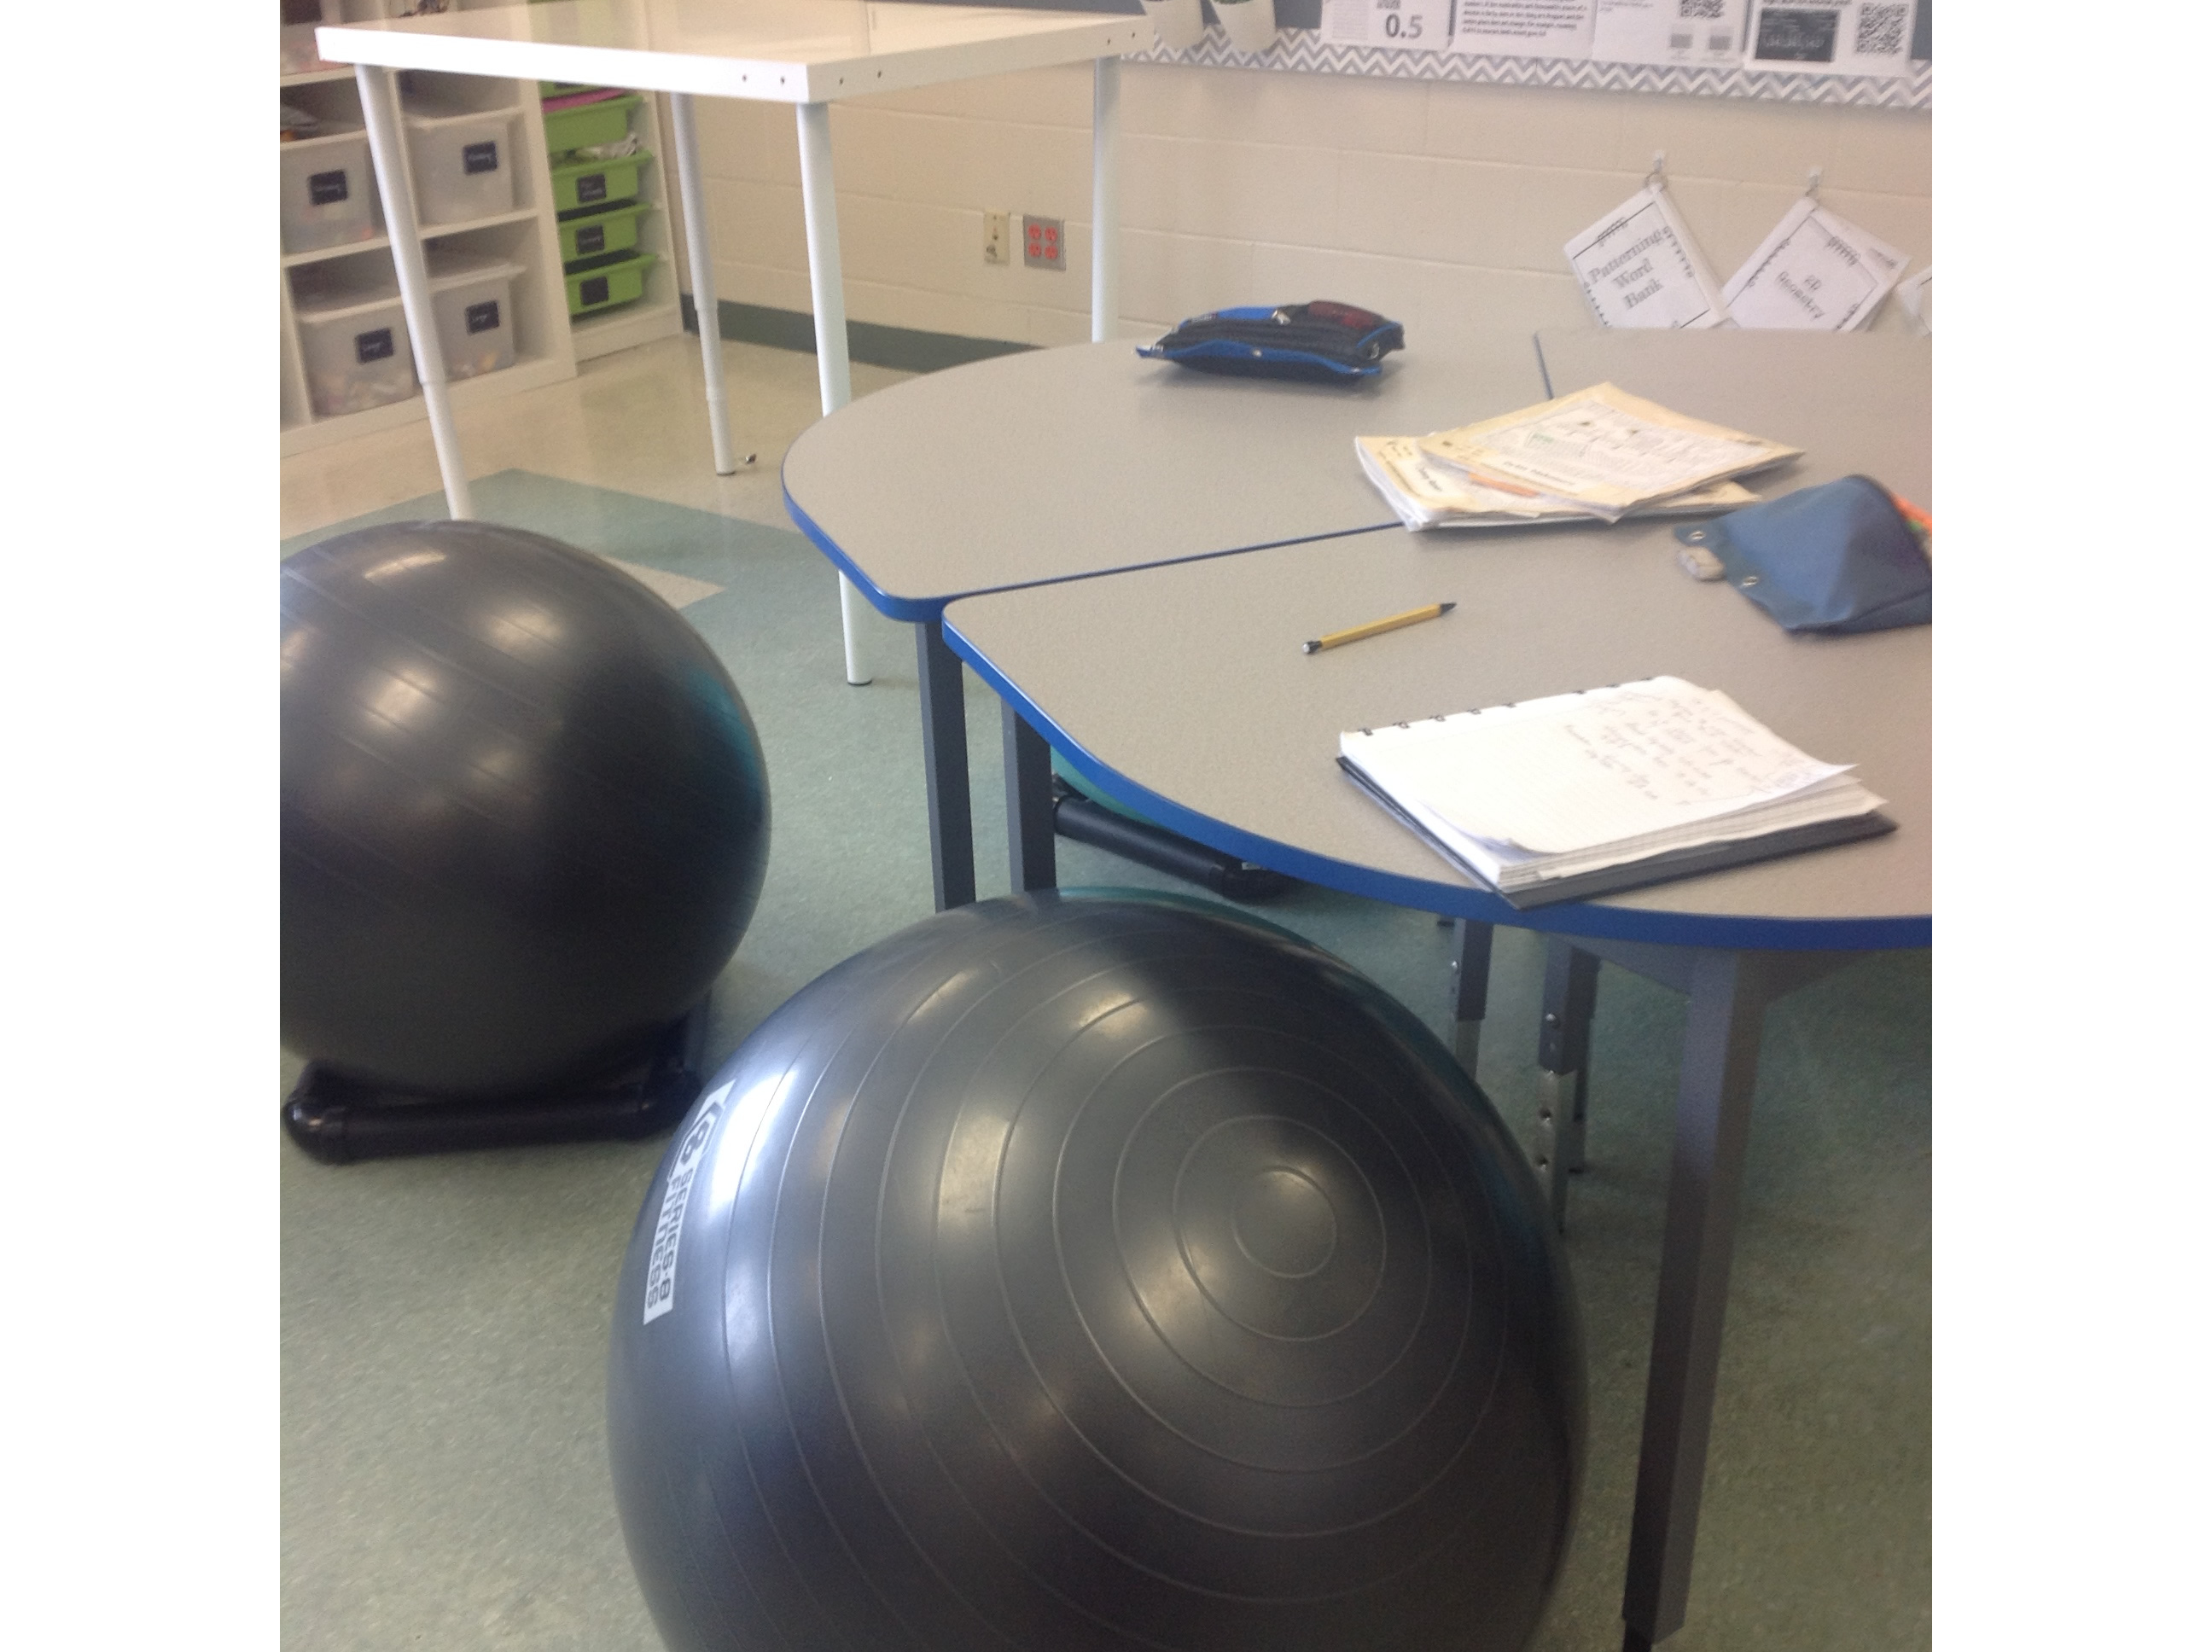 round yoga balls as seats in a classroom